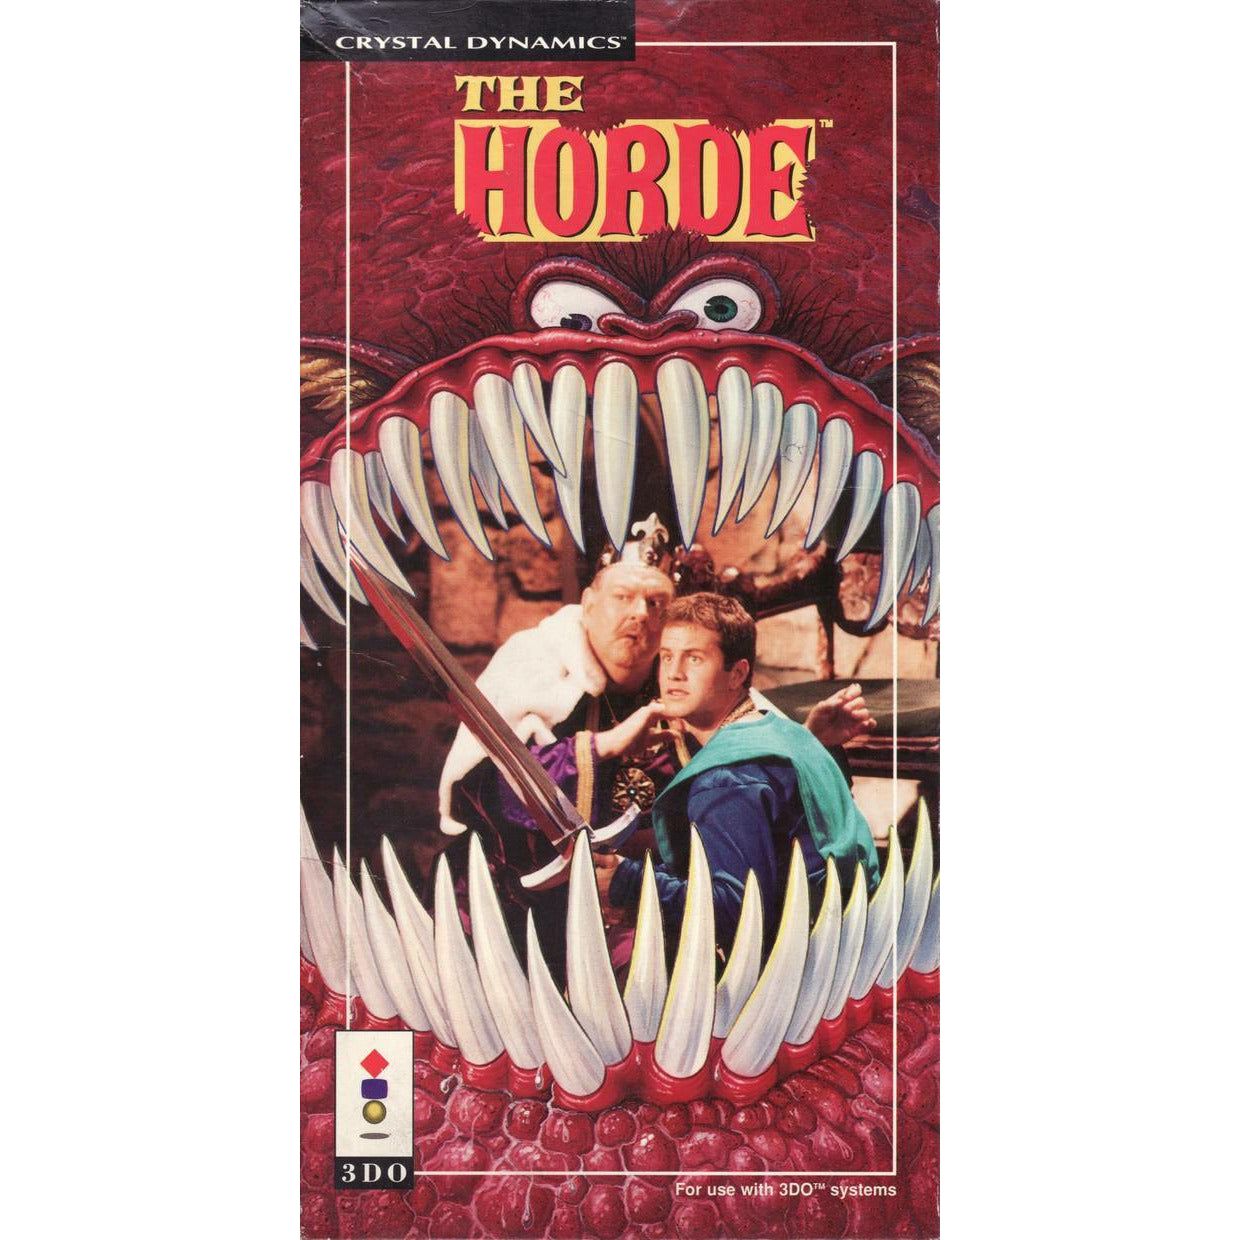 3DO - The Horde (Printed Cover Art)